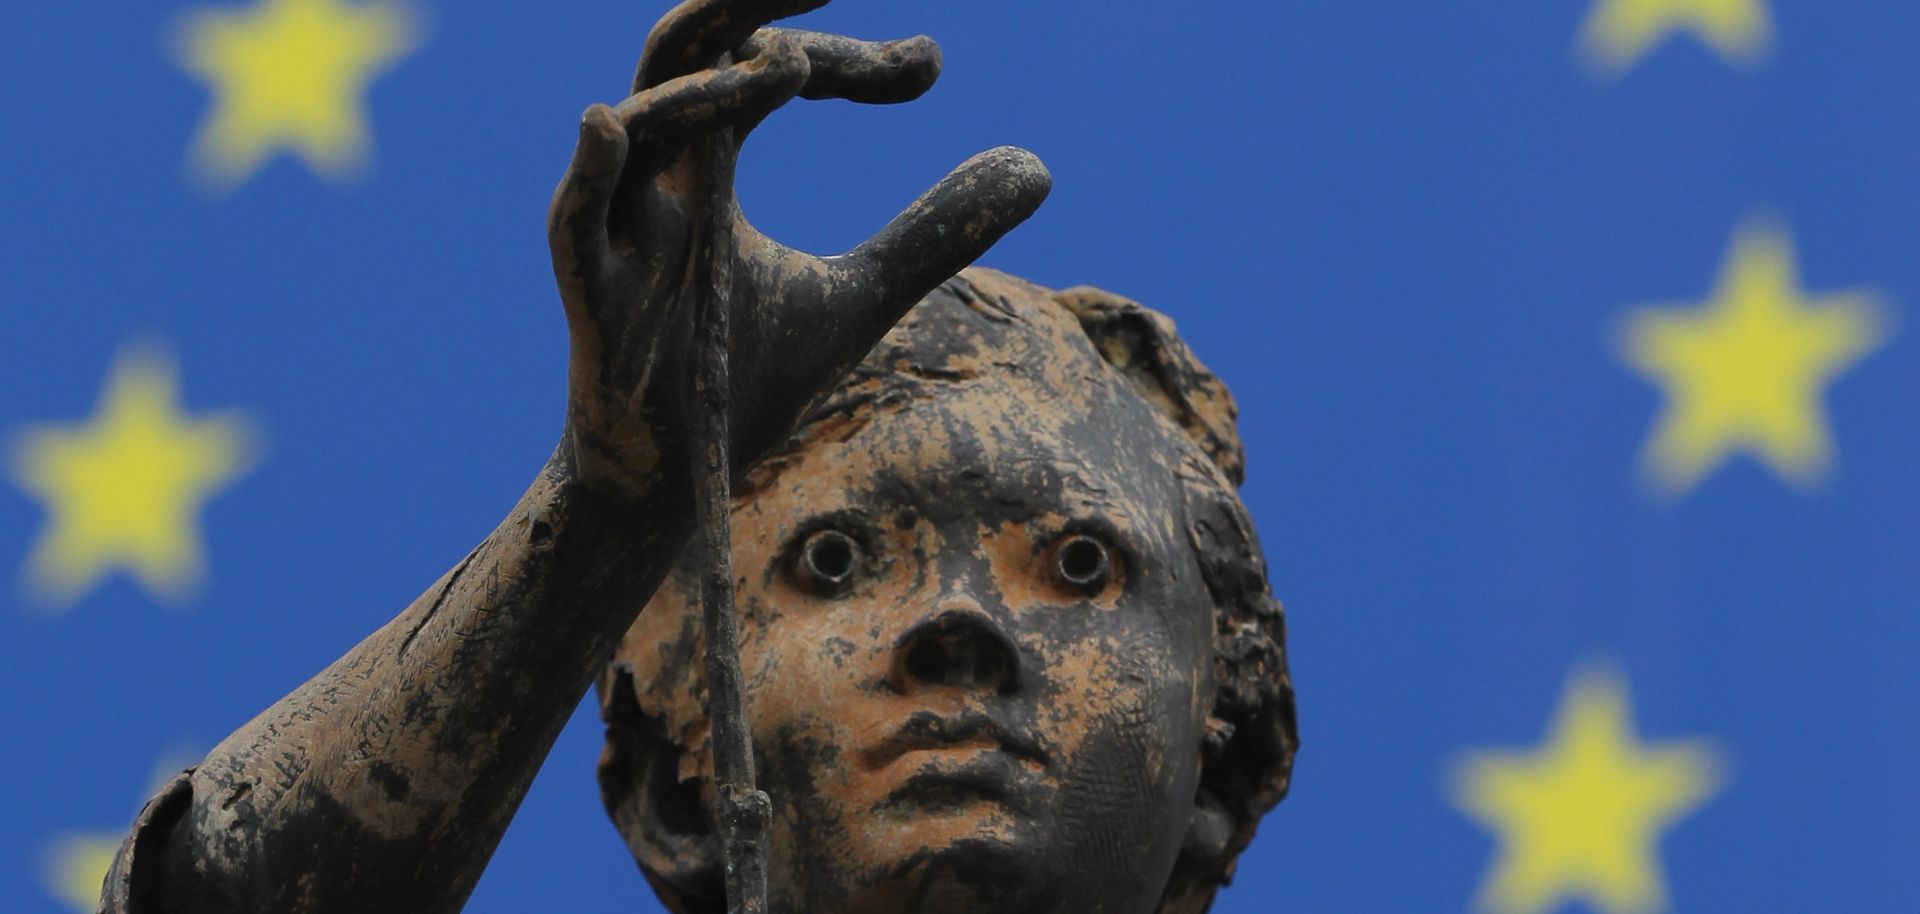 One of the sculptures of young girls by artist Rene Julien stands in front of a flag of the European Union